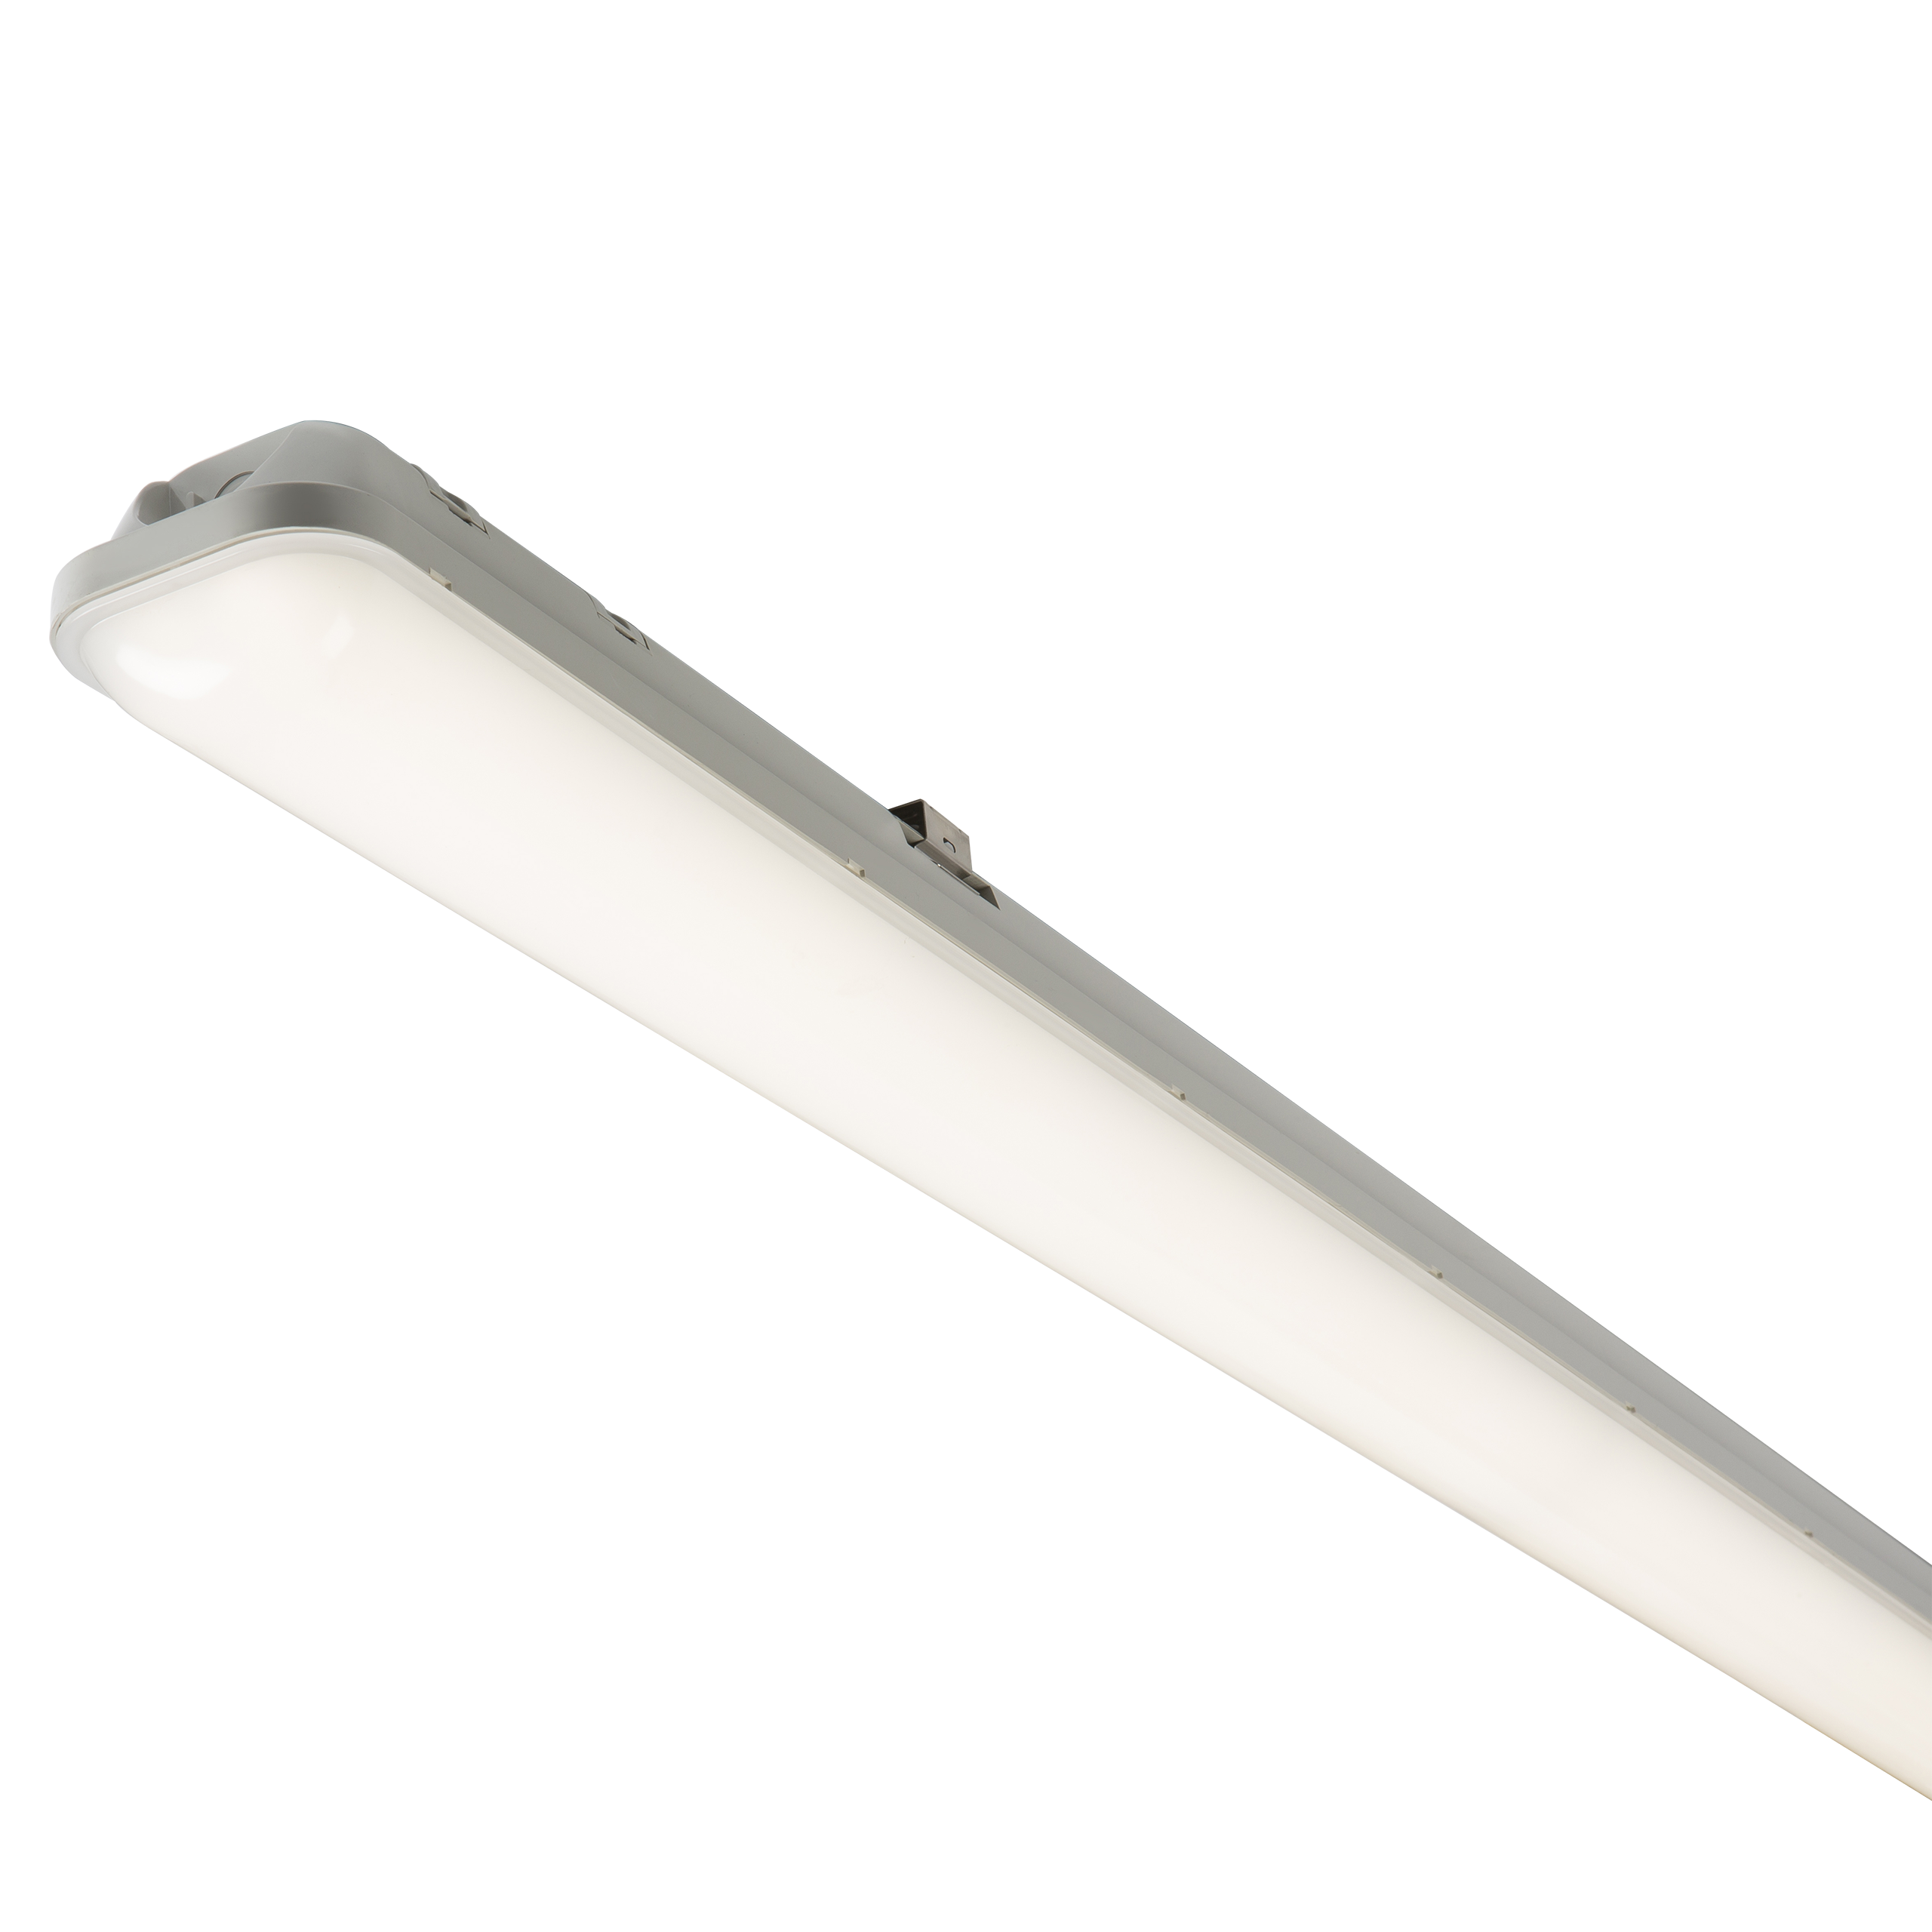 ML Accessories-NCLED60S 230V IP65 5ft 60W LED Non-Corrosive Fitting with Microwave Sensor- 1480mm